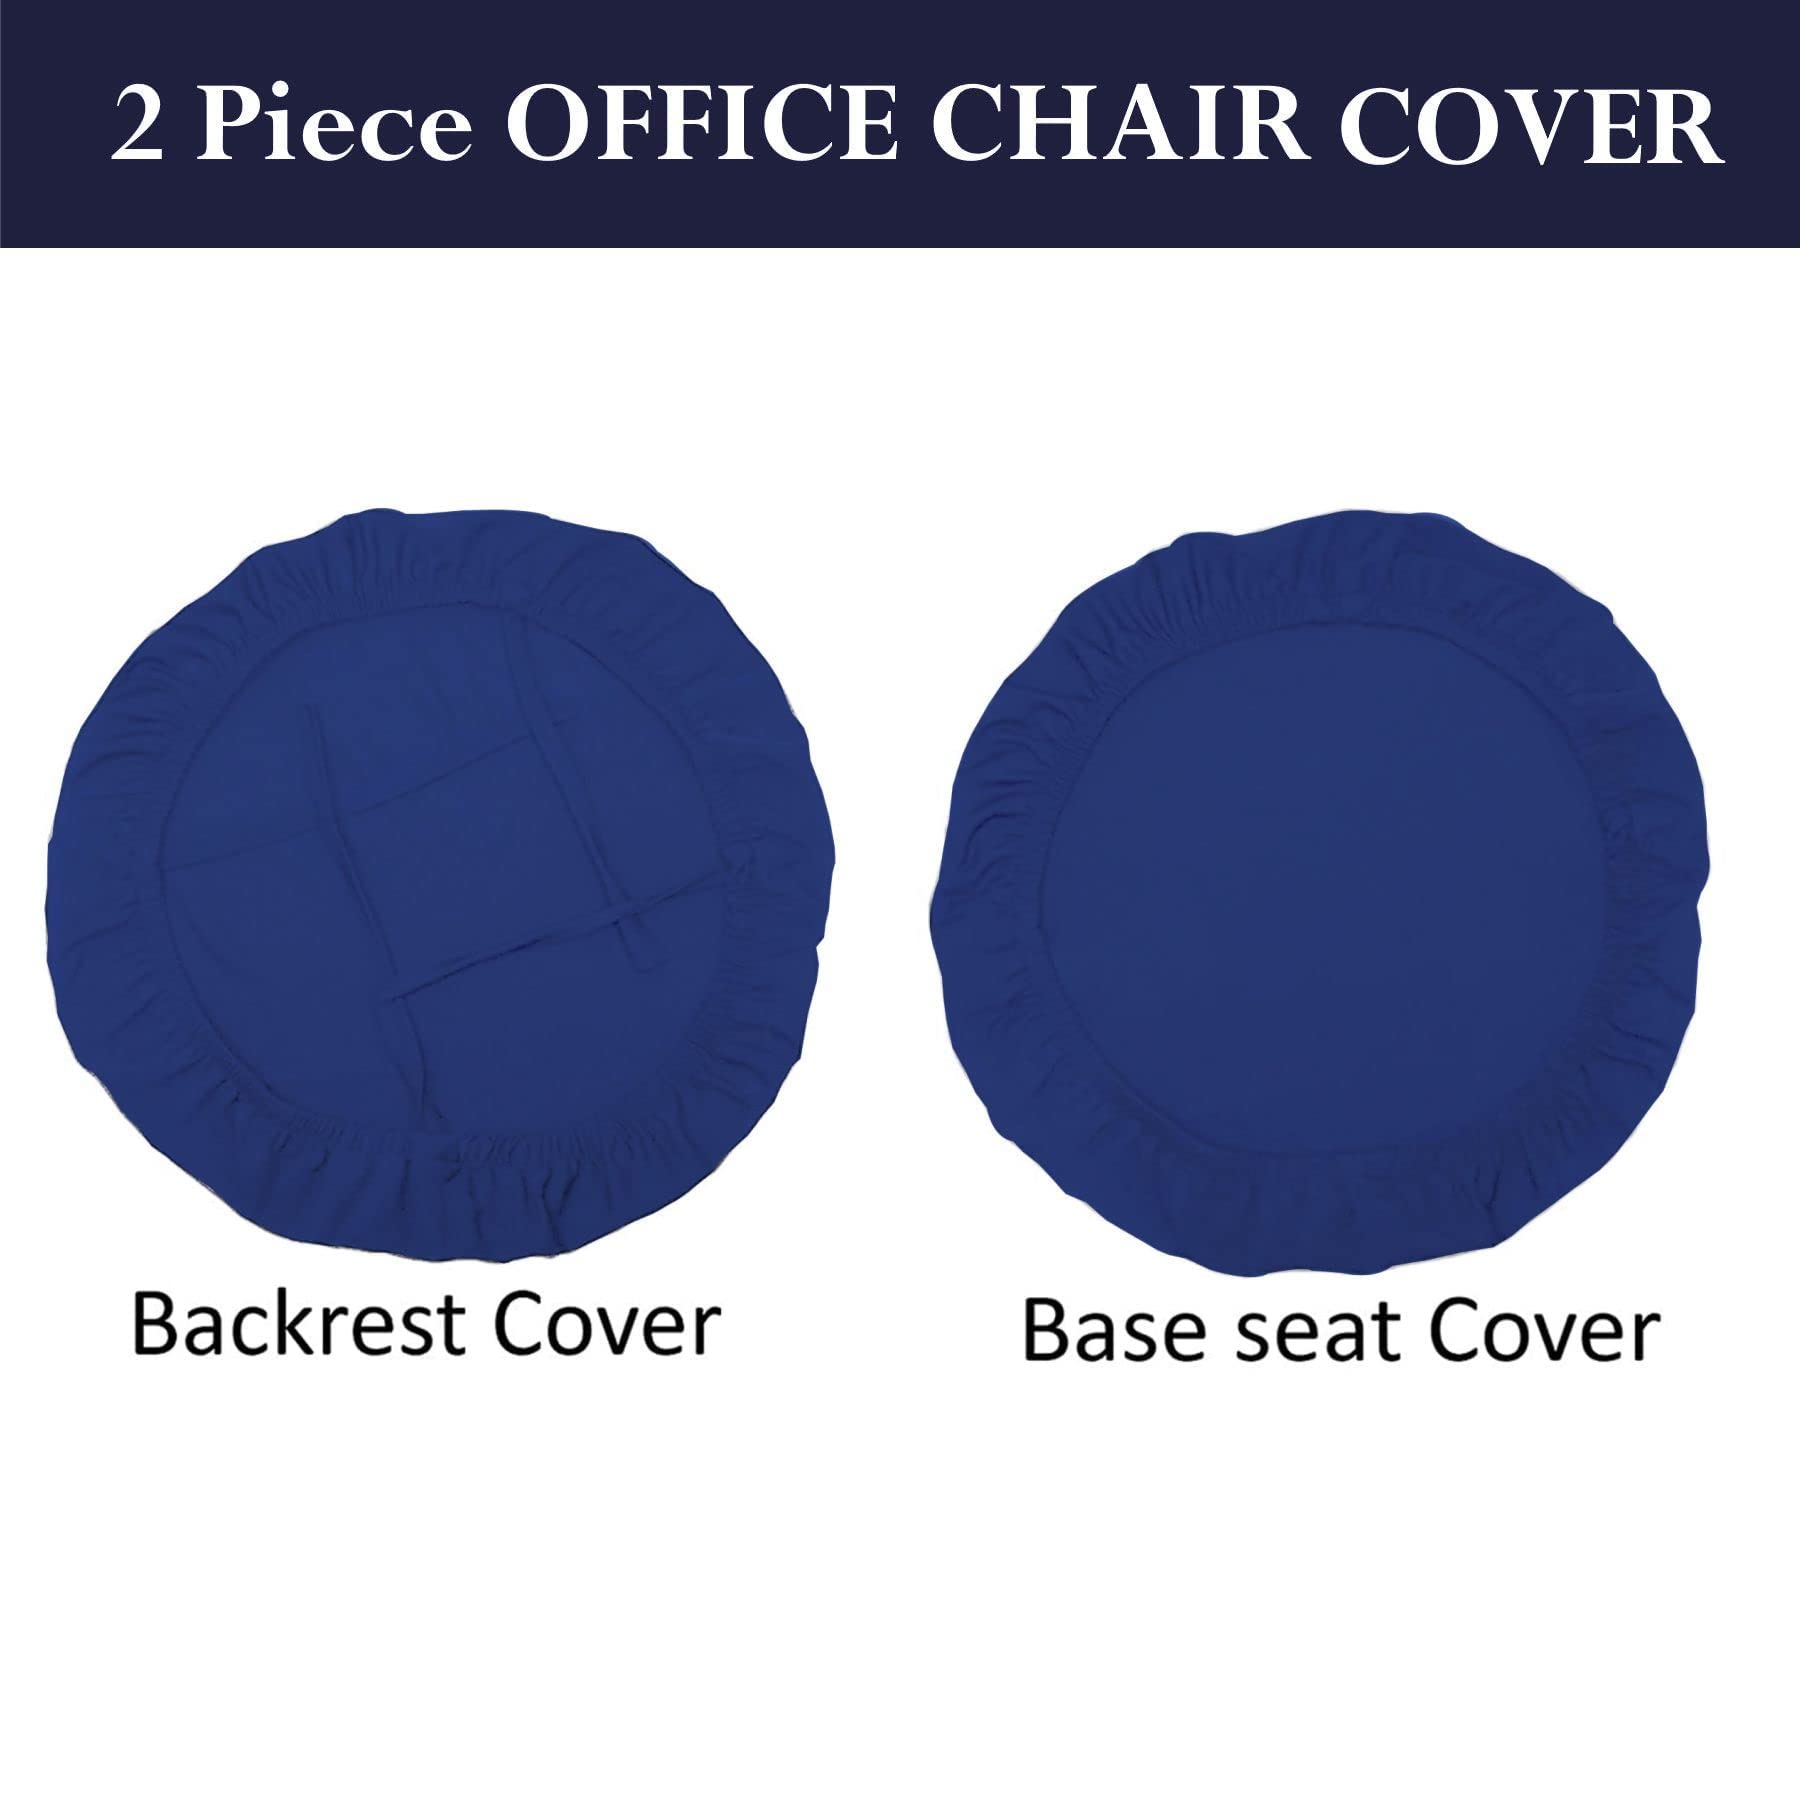 HOTKEI 2Pcs Chair Cover Set of 100 Navy Blue Stretchable Elastic Removable Washable Office Chair Cover Desk Executive Rotating Chair Seat Cover Slipcover Protector for Office Computer Chair